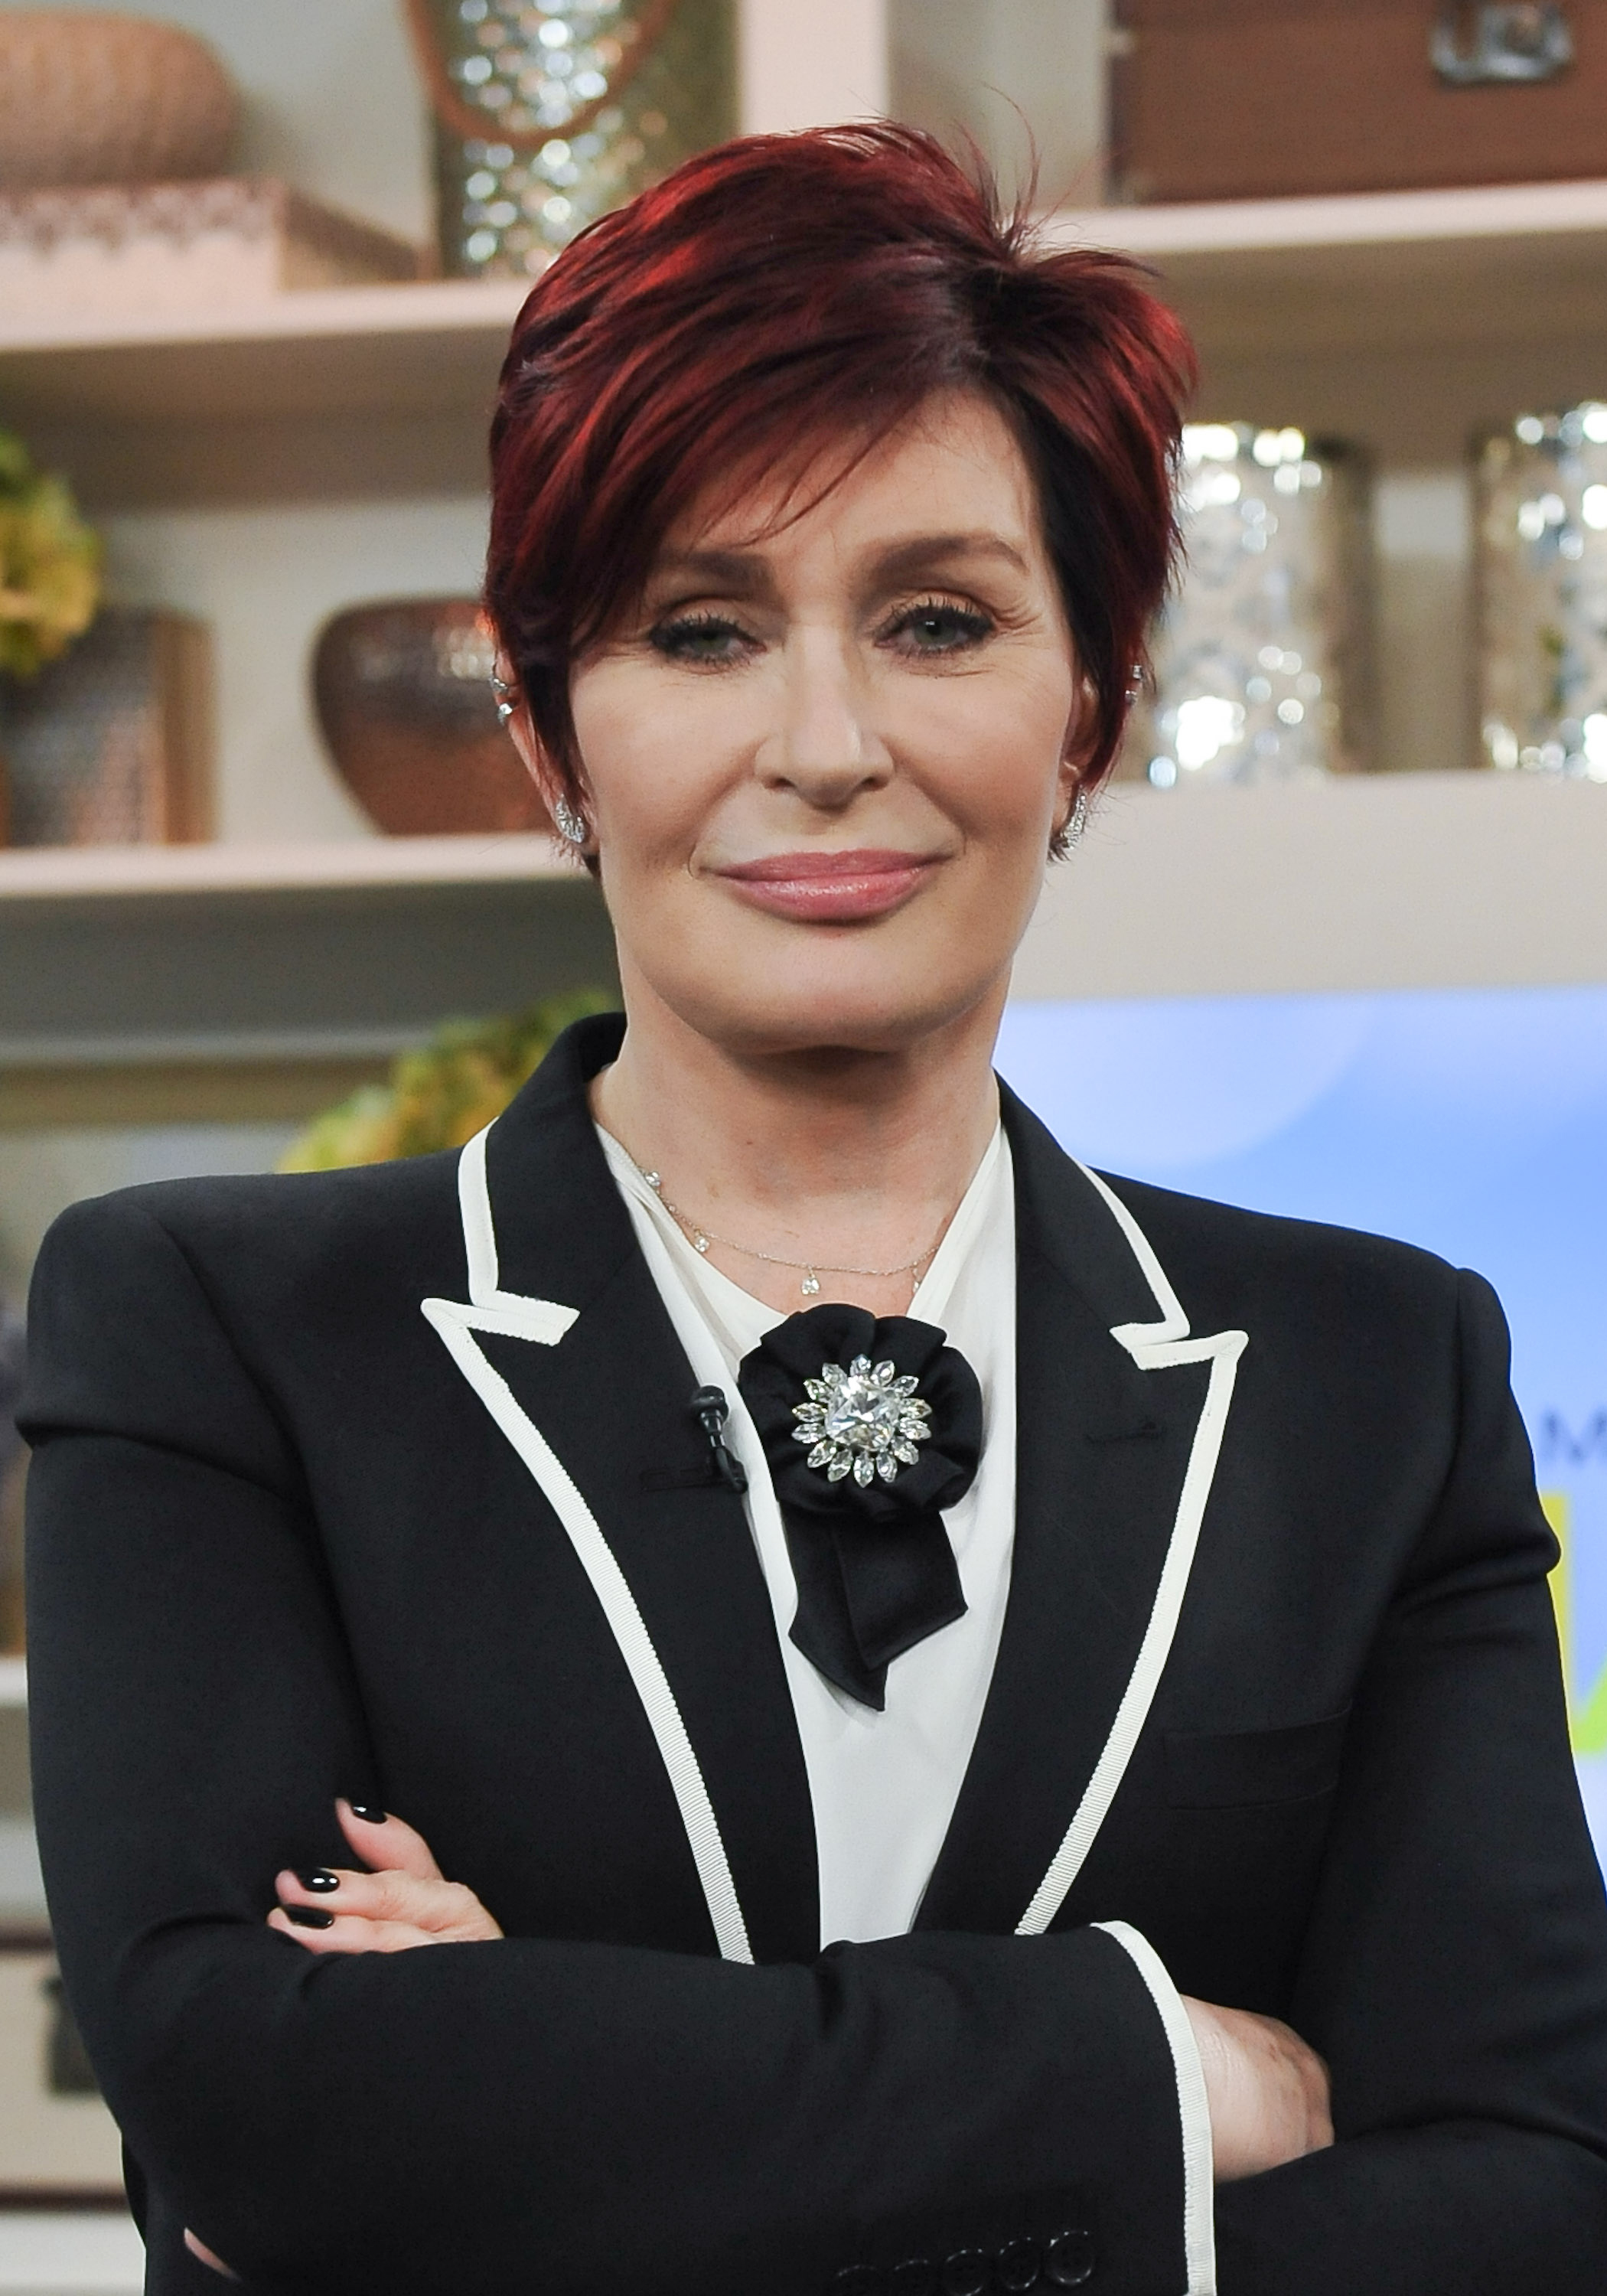 TV personality Sharon Osbourne appears on CTV's "The Marilyn Denis Show" at Bell Media Headquarters on May 15, 2015 in Toronto.